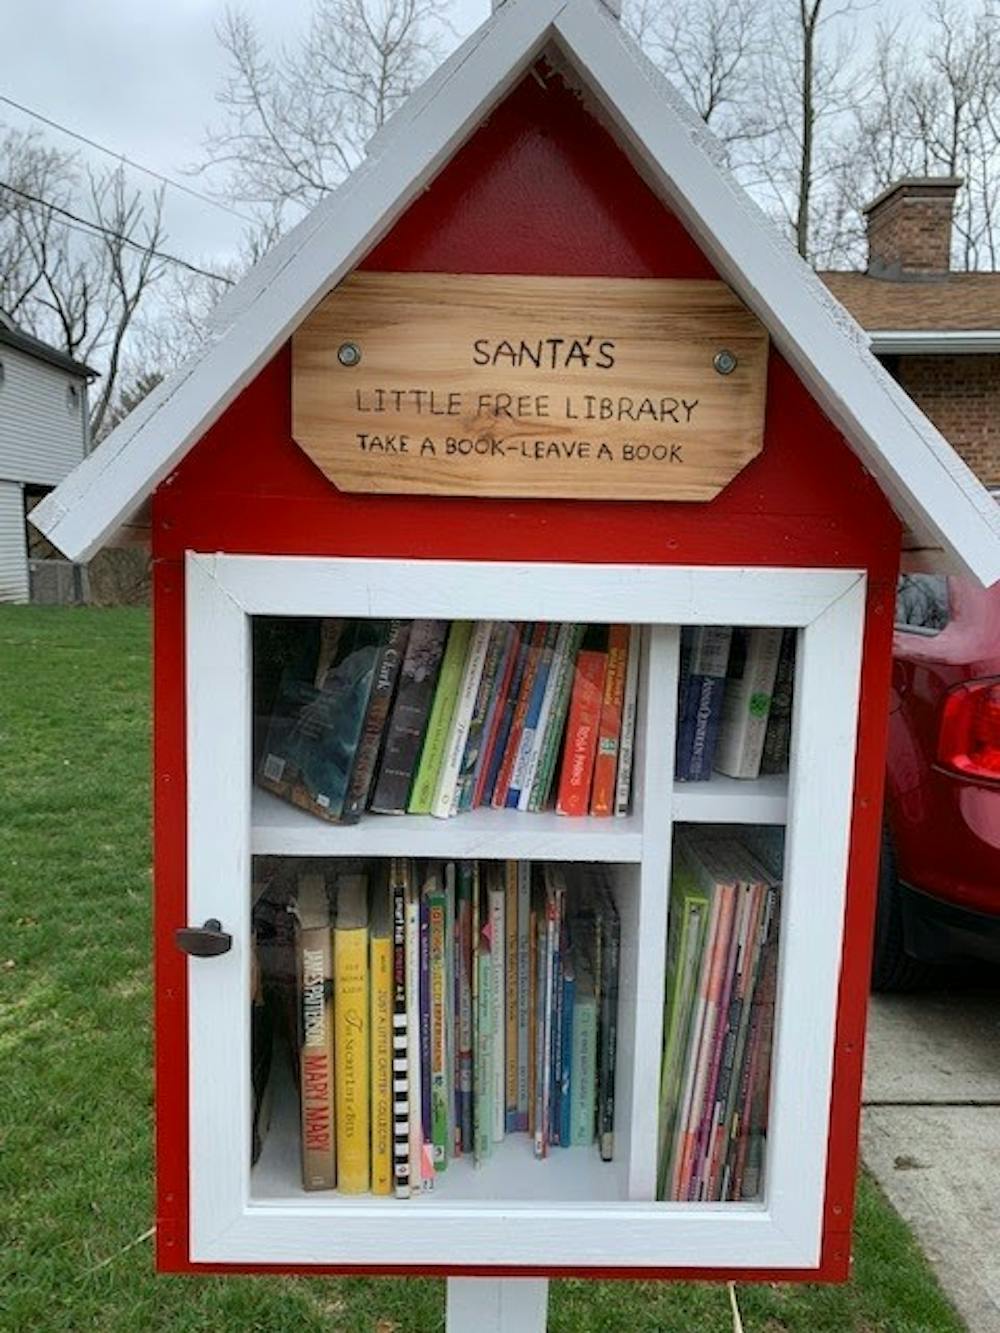 Trying to keep a sense of community during the pandemic, one Oxford resident has created a little library in front of his home.